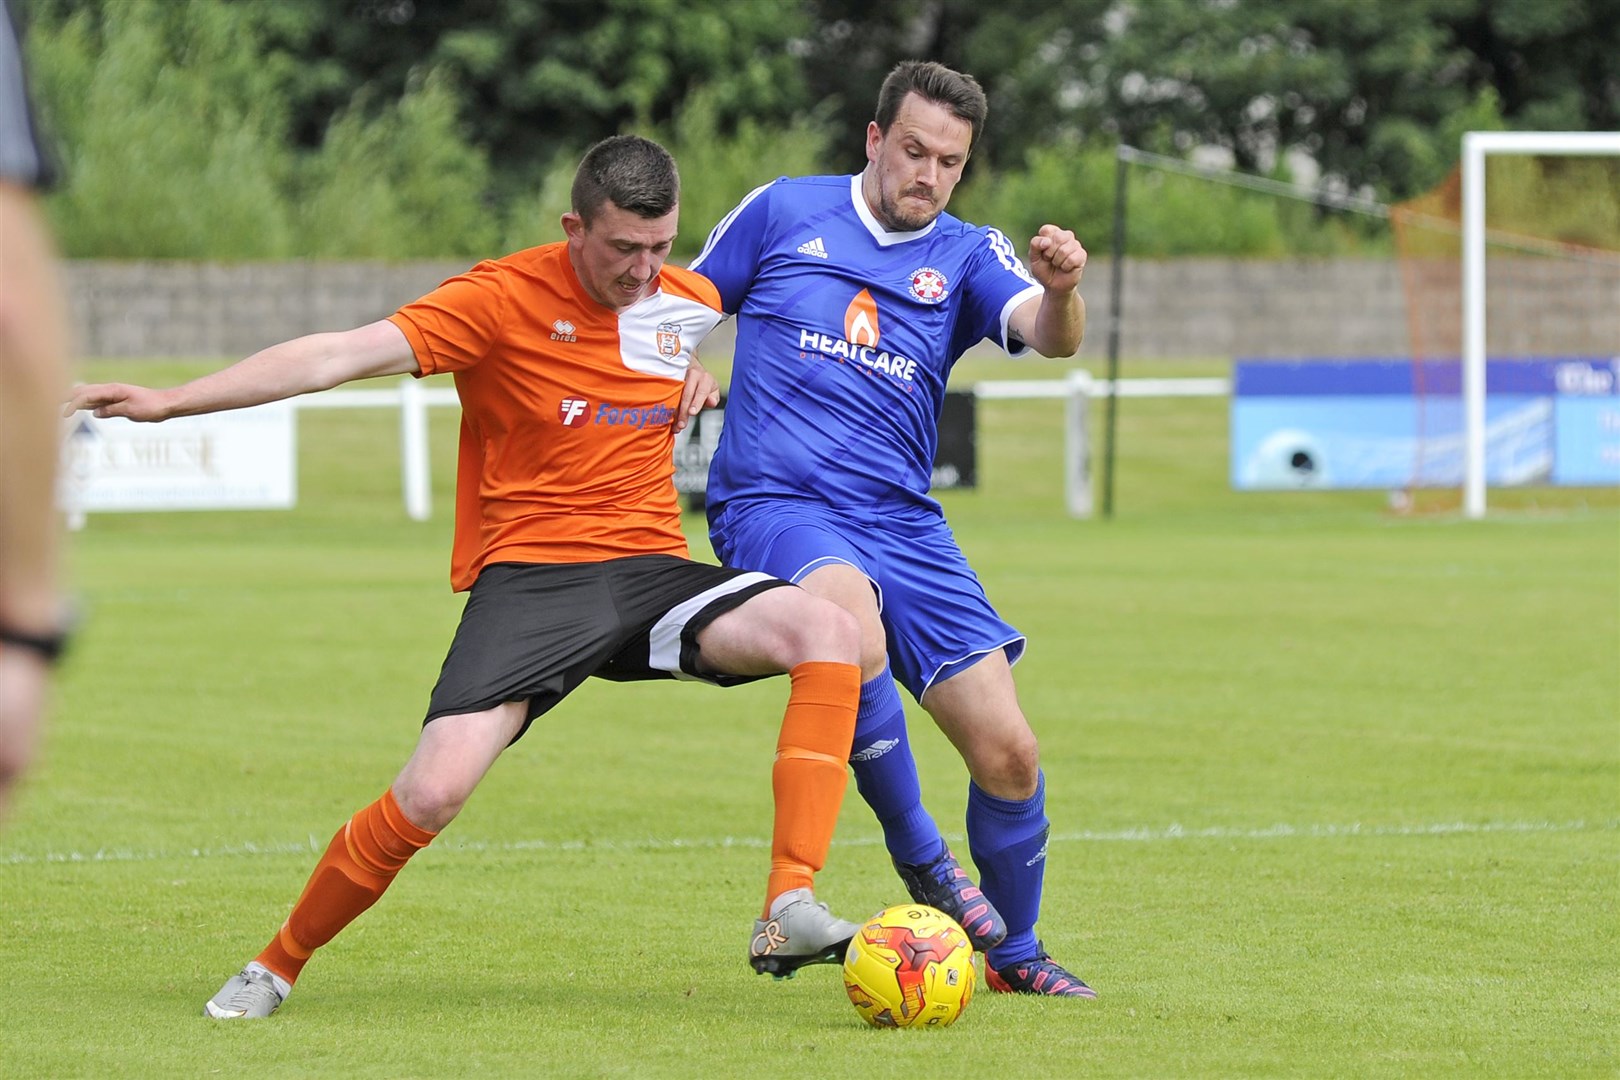 Former Rothes player David McNamara (left) starred in Hopeman's opening day win over Cullen.